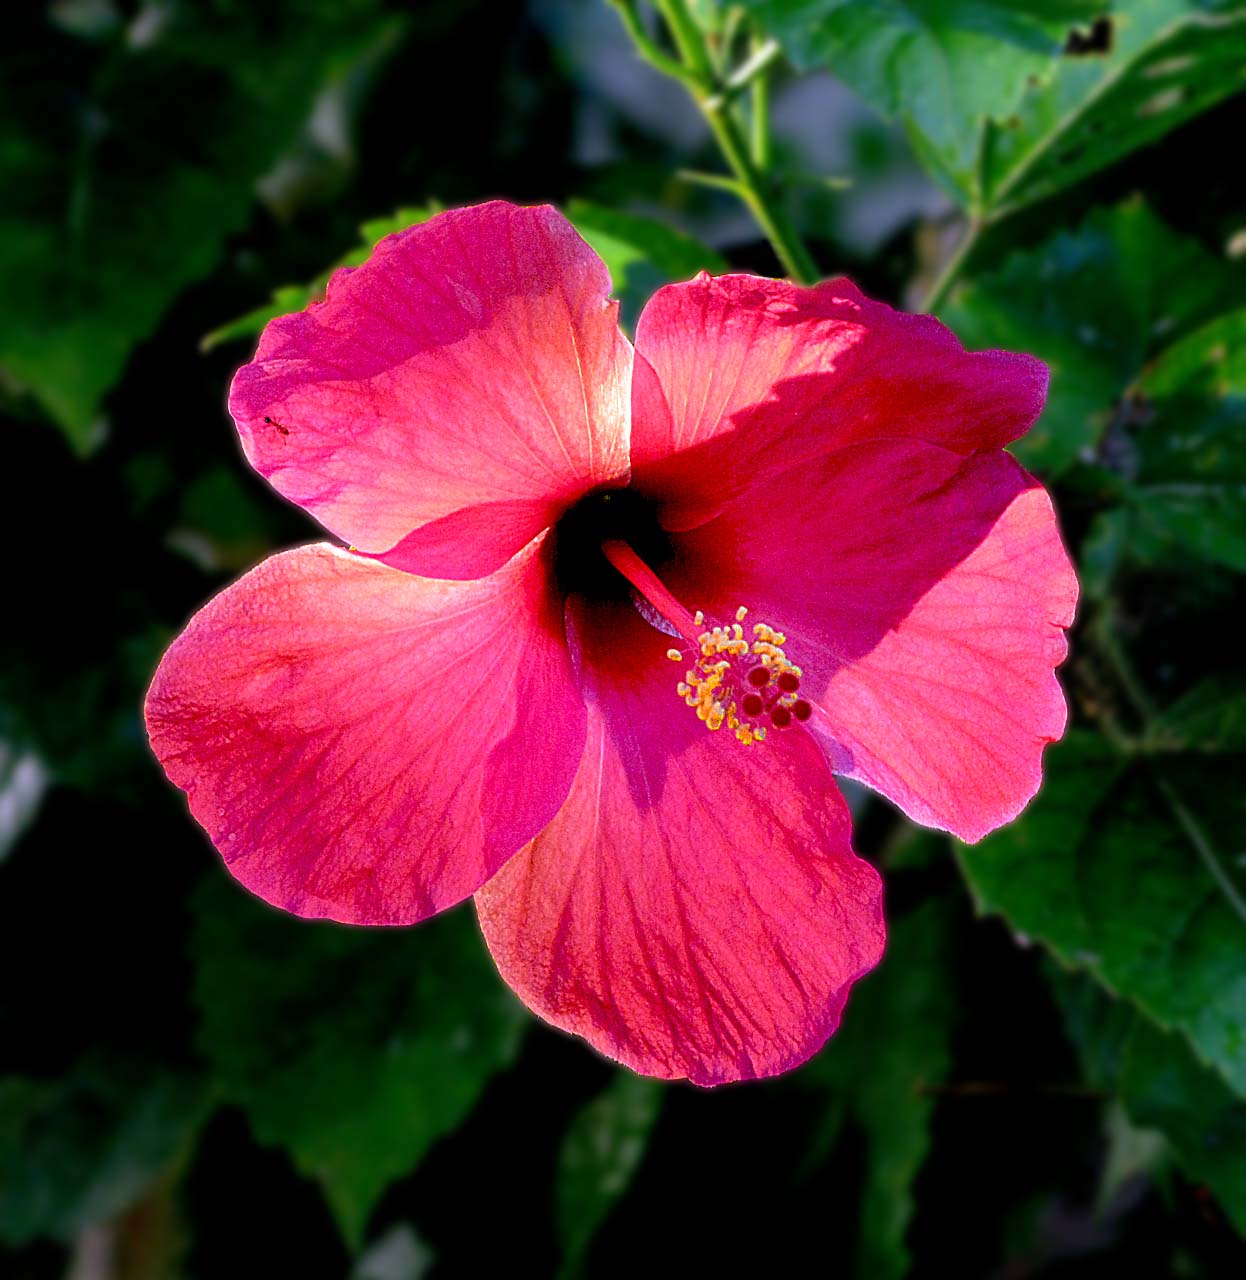 The real hibiscus